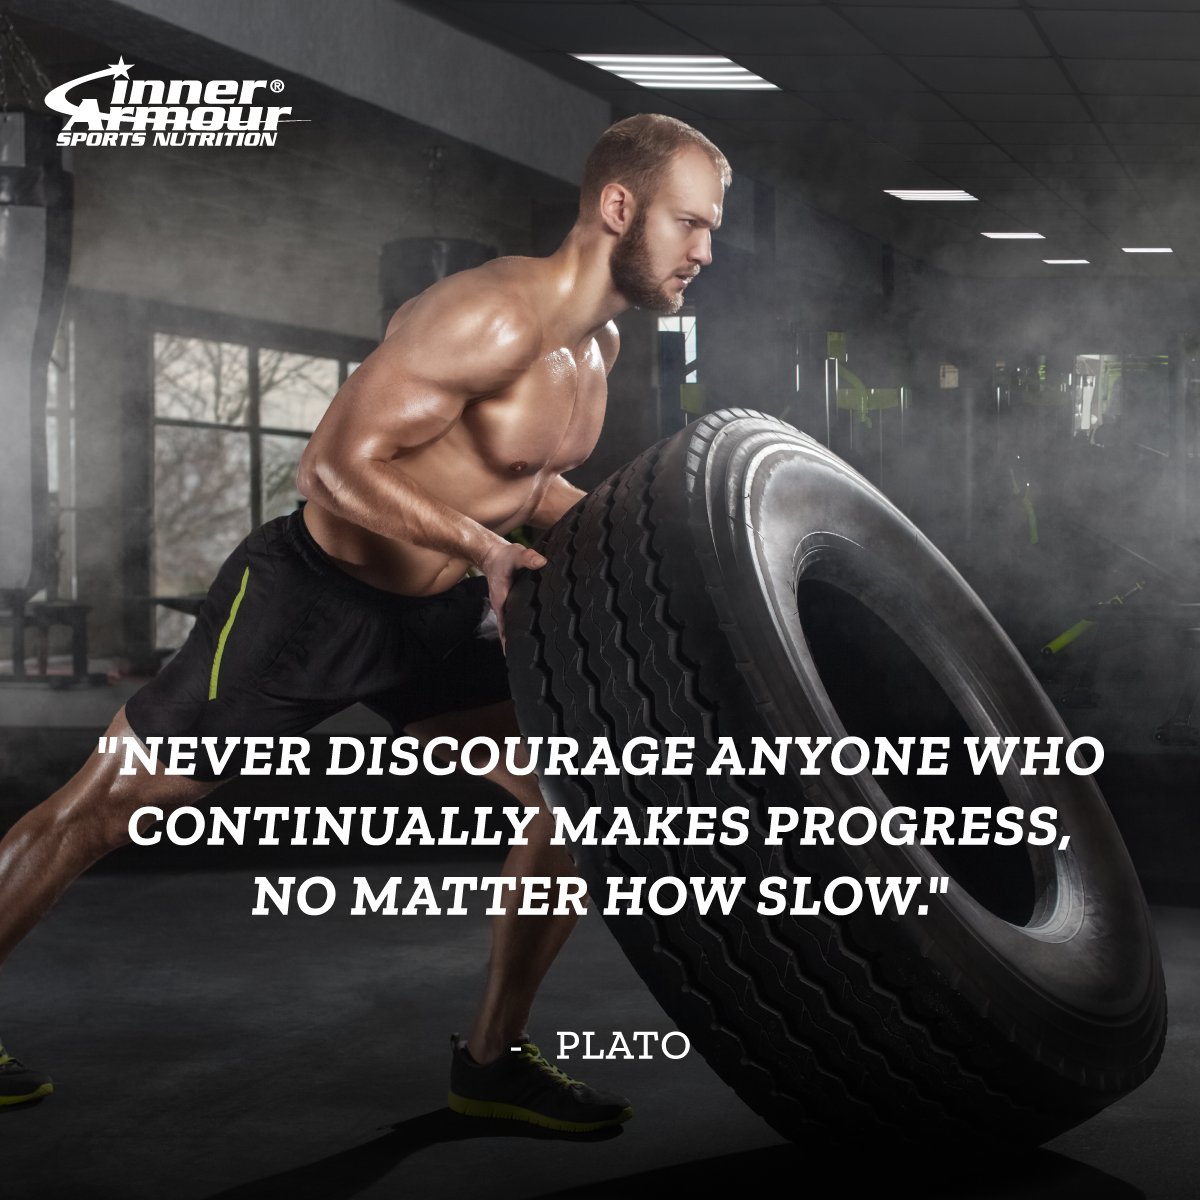 Never discourage anyone who continually makes progress, no matter how slow. - Plato #InnerArmour #StrengthFromWithin #sportsnutrition #indisputableresults